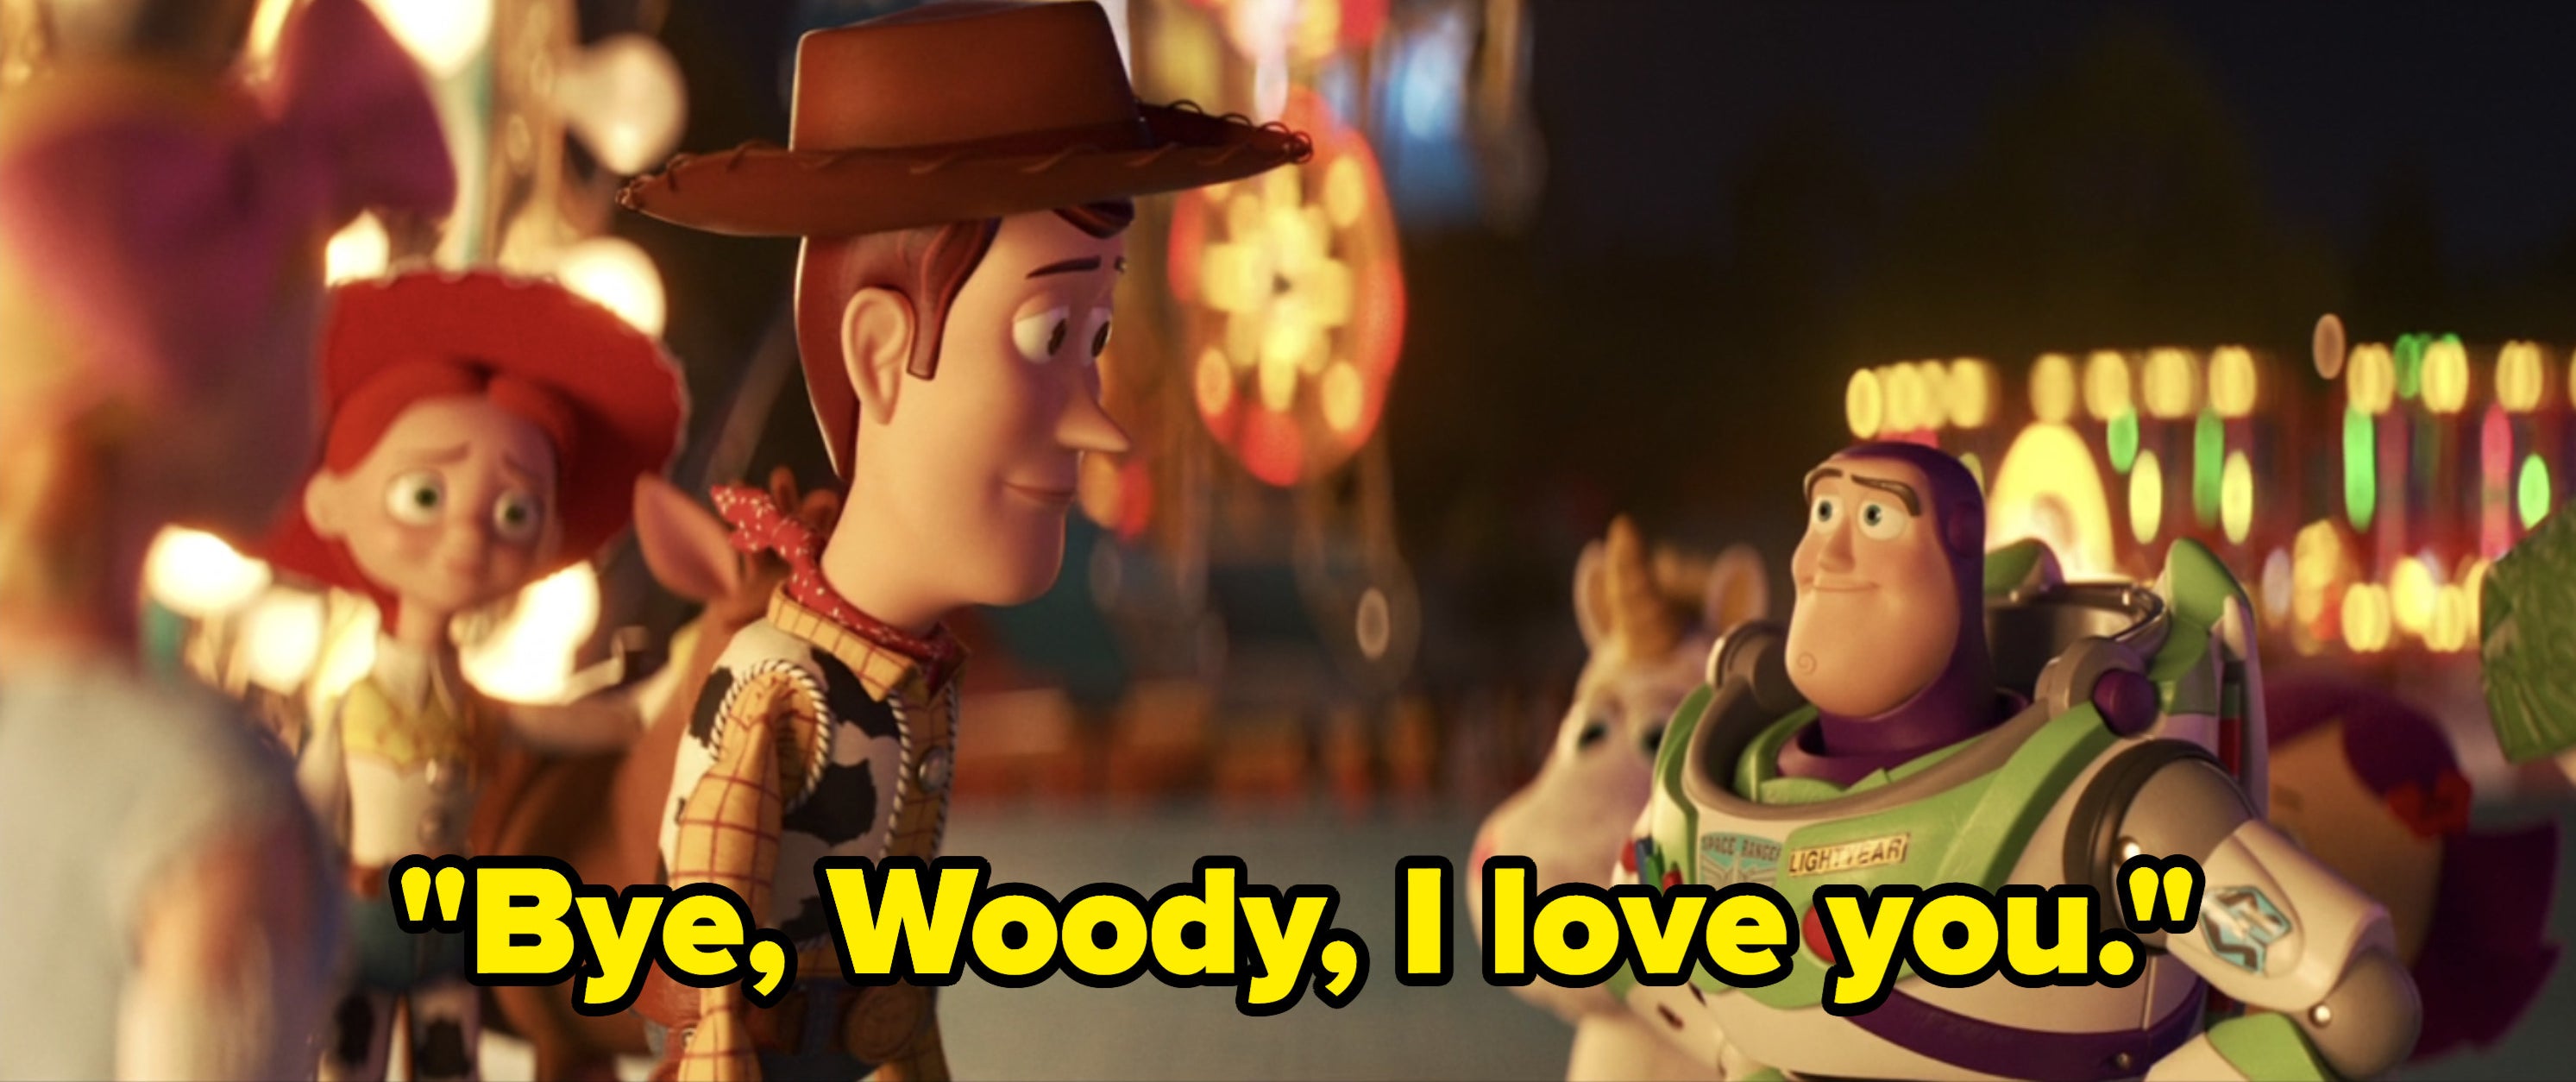 Woody and Buzz say goodbye, with caption &quot;Bye, Woody, I love you.&quot; 